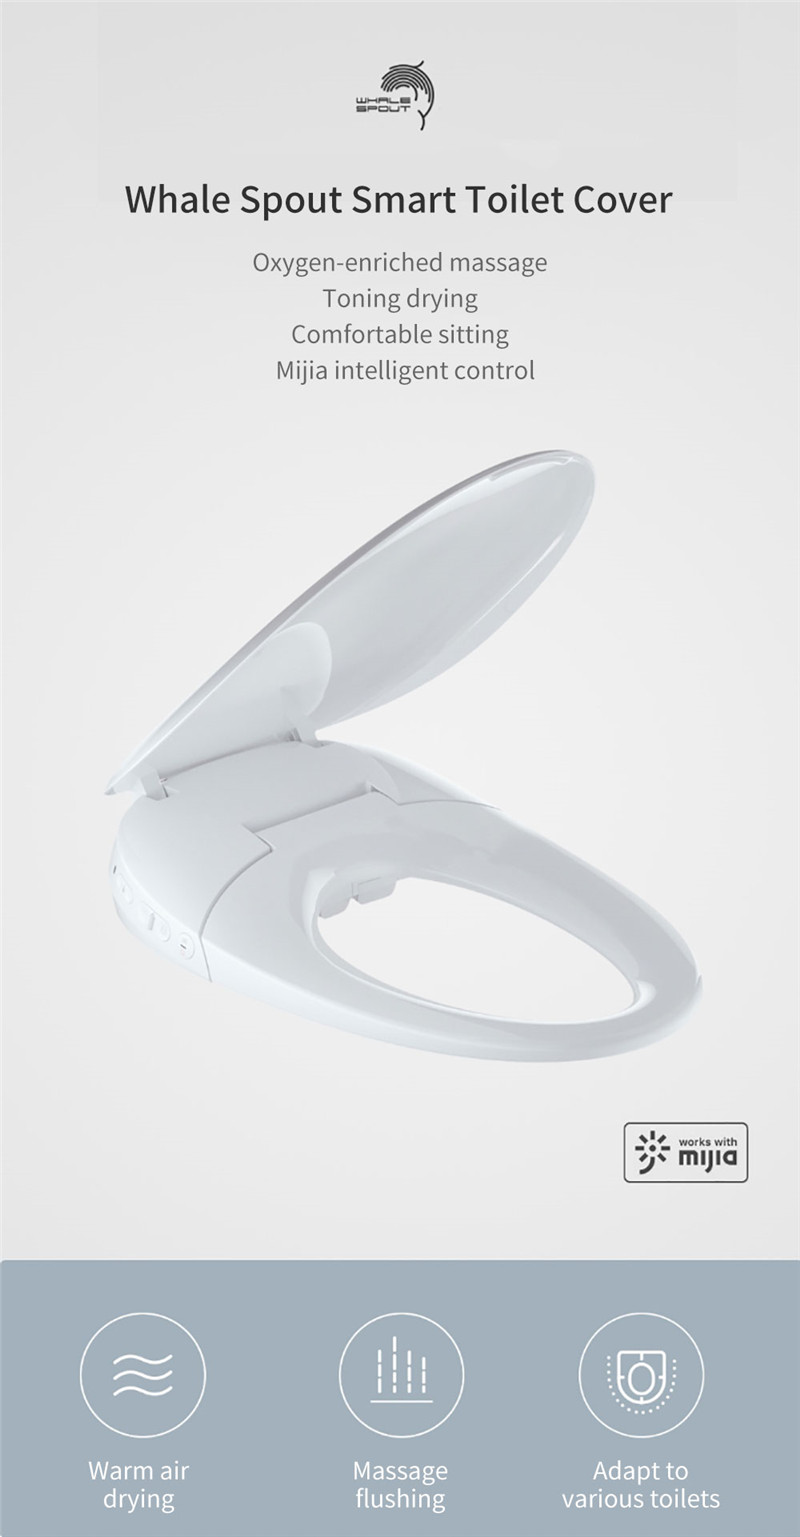 Xiaomi-Whale-Spout-Washing-Intelligent-Temperature-APP-Smart-Toilet-Cover-Seat--with-LED-Night-Light-1360348-1